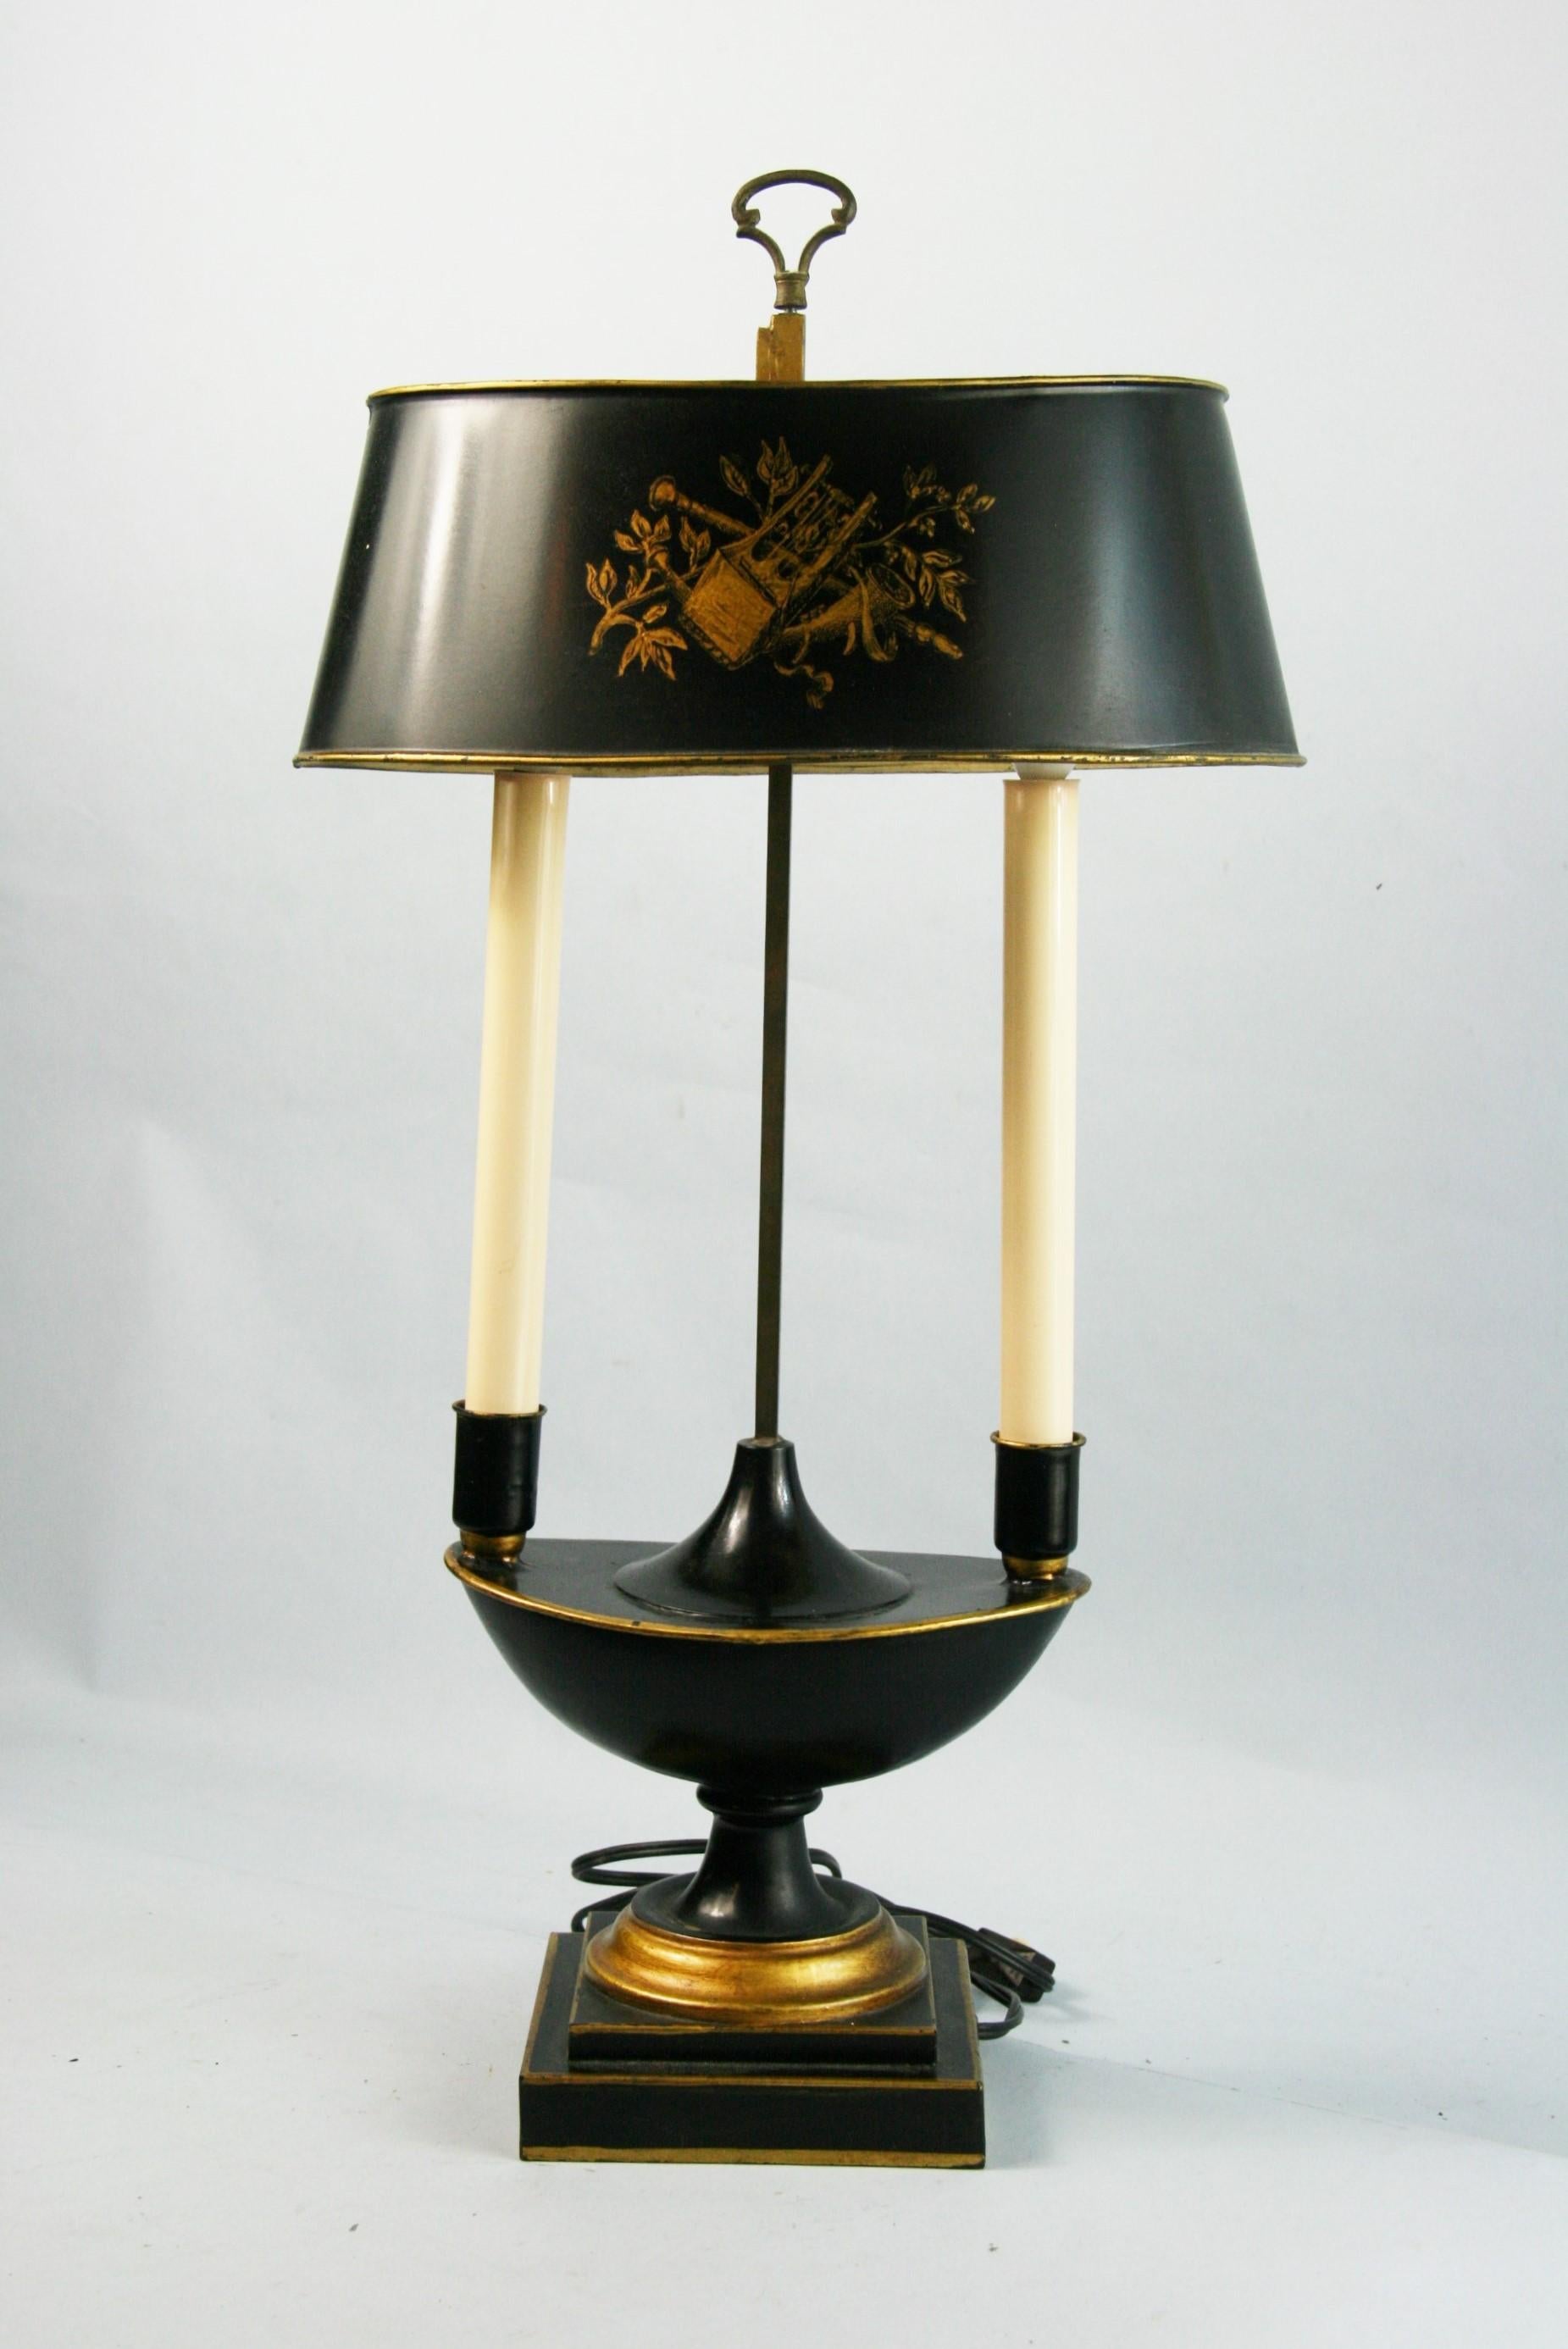 Italian 2 light lamp with hand painted decorations and metal shade
Takes 2 60 watt max candelabra based bulbs
Original wiring with inline switch in working condition.